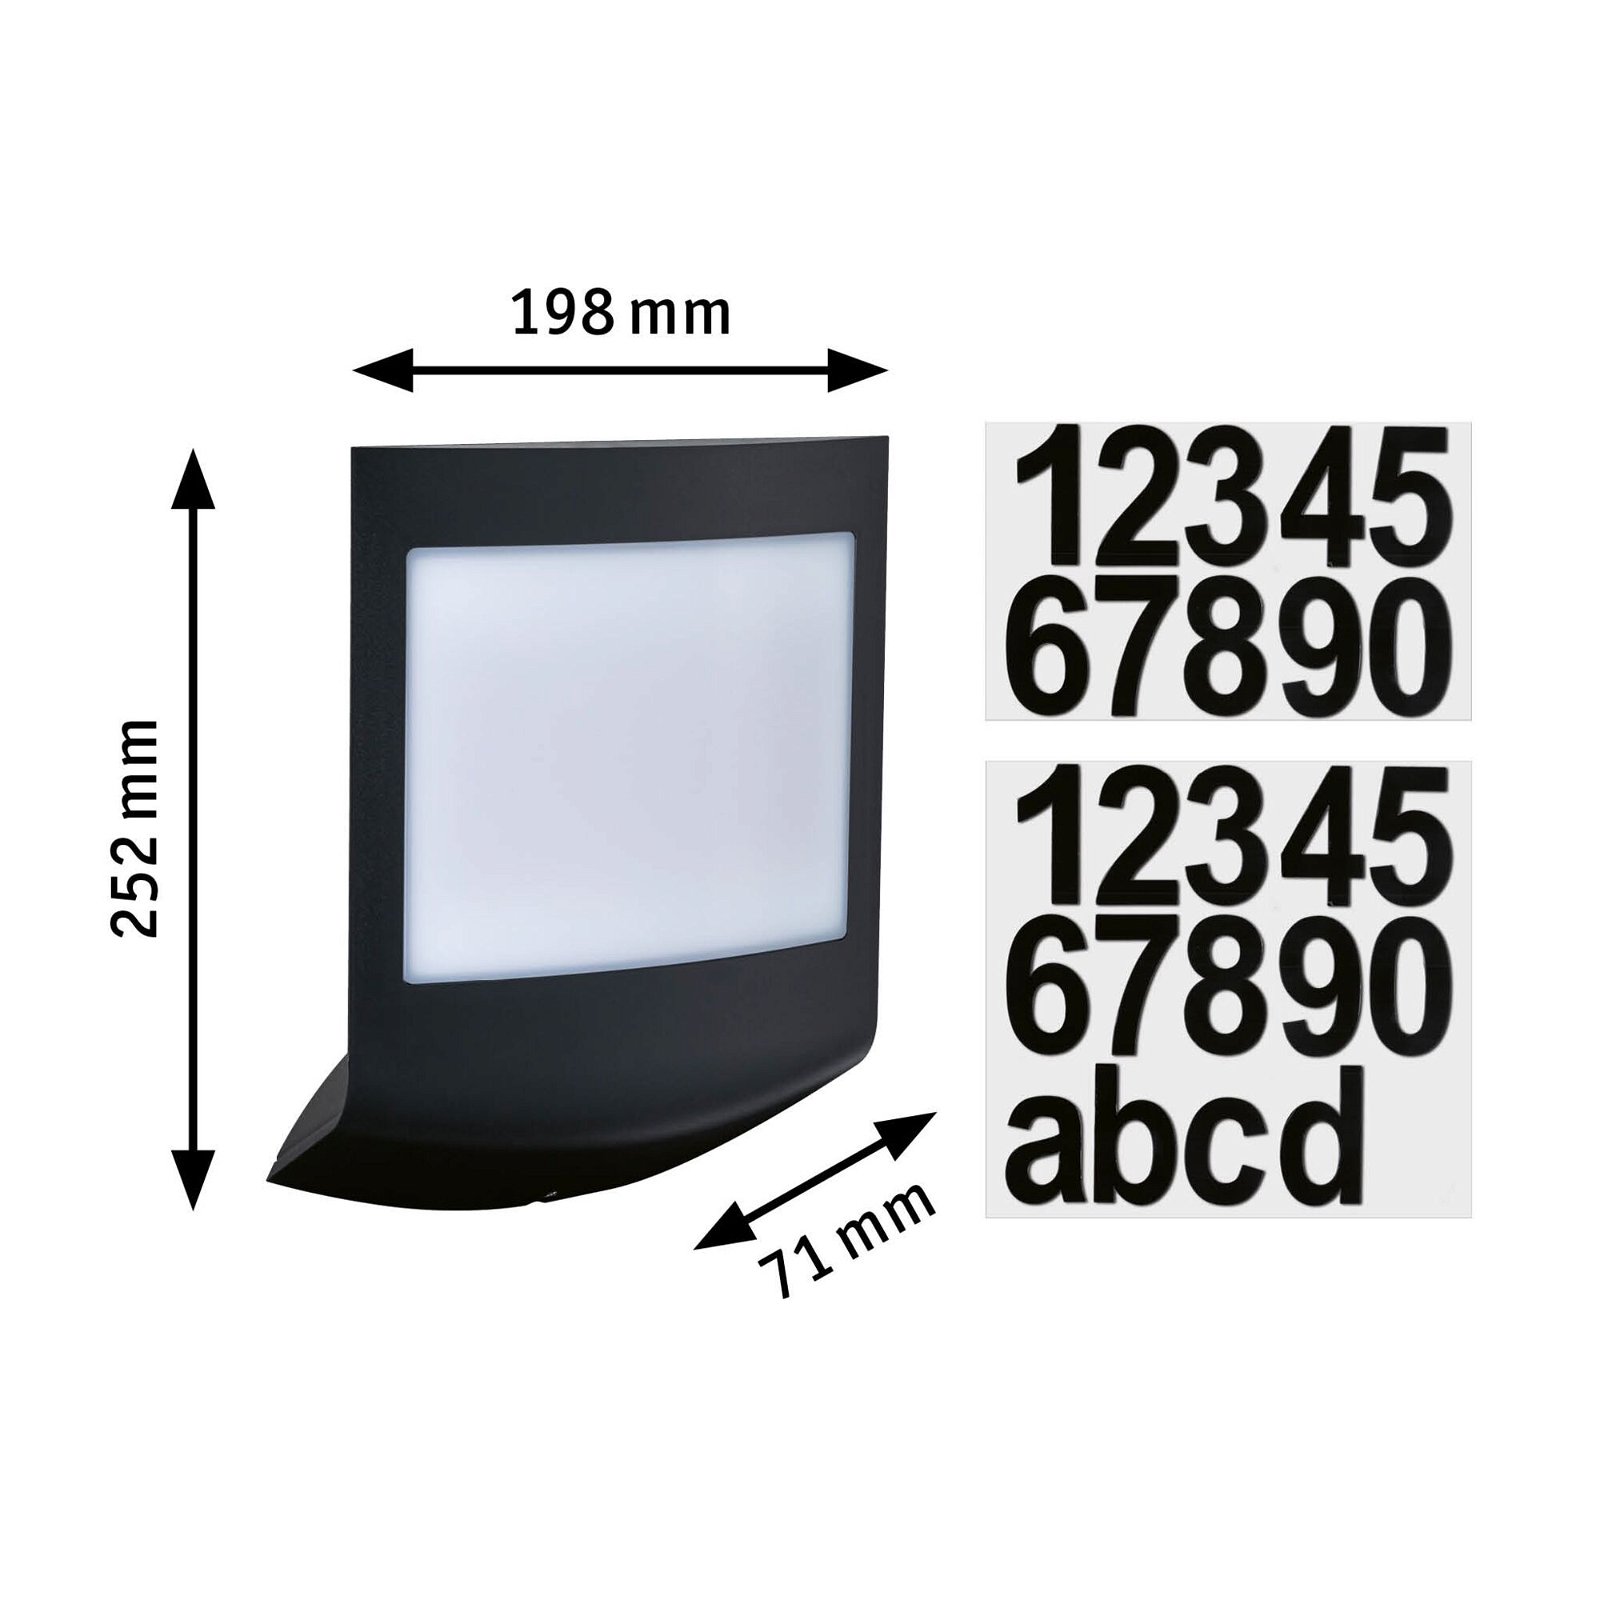 LED Exterior wall luminaire Smart Home Zigbee Padea Dusk sensor insect friendly IP44 198x71mm Tunable Warm 8,2W 550lm 230V Anthracite Plastic